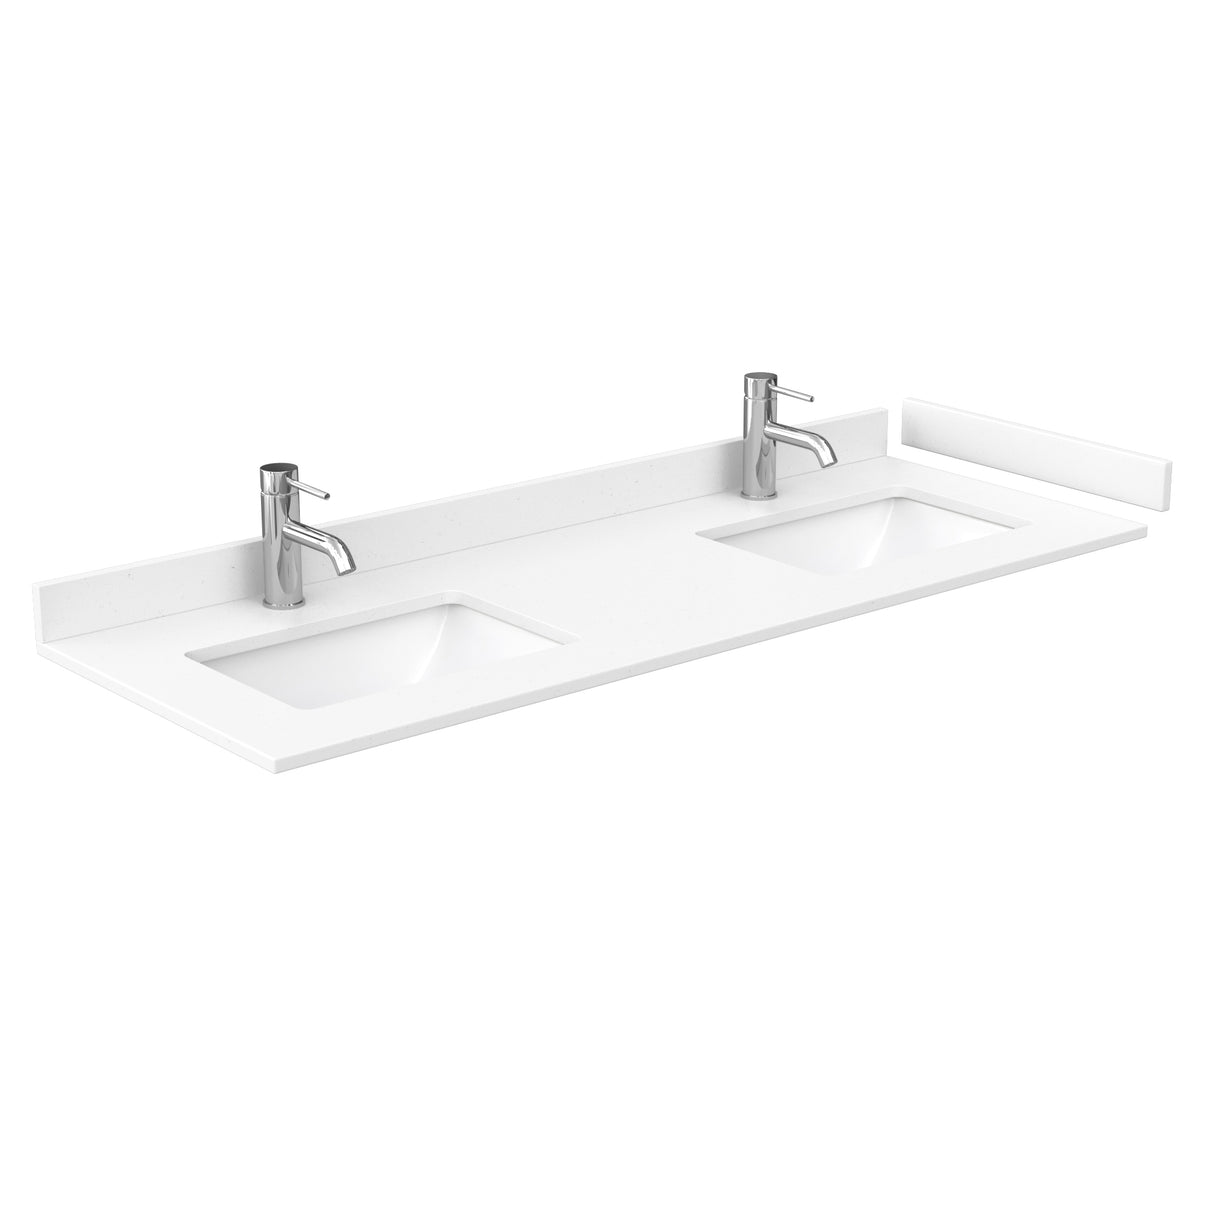 Avery 60 Inch Double Bathroom Vanity in White White Cultured Marble Countertop Undermount Square Sinks No Mirror